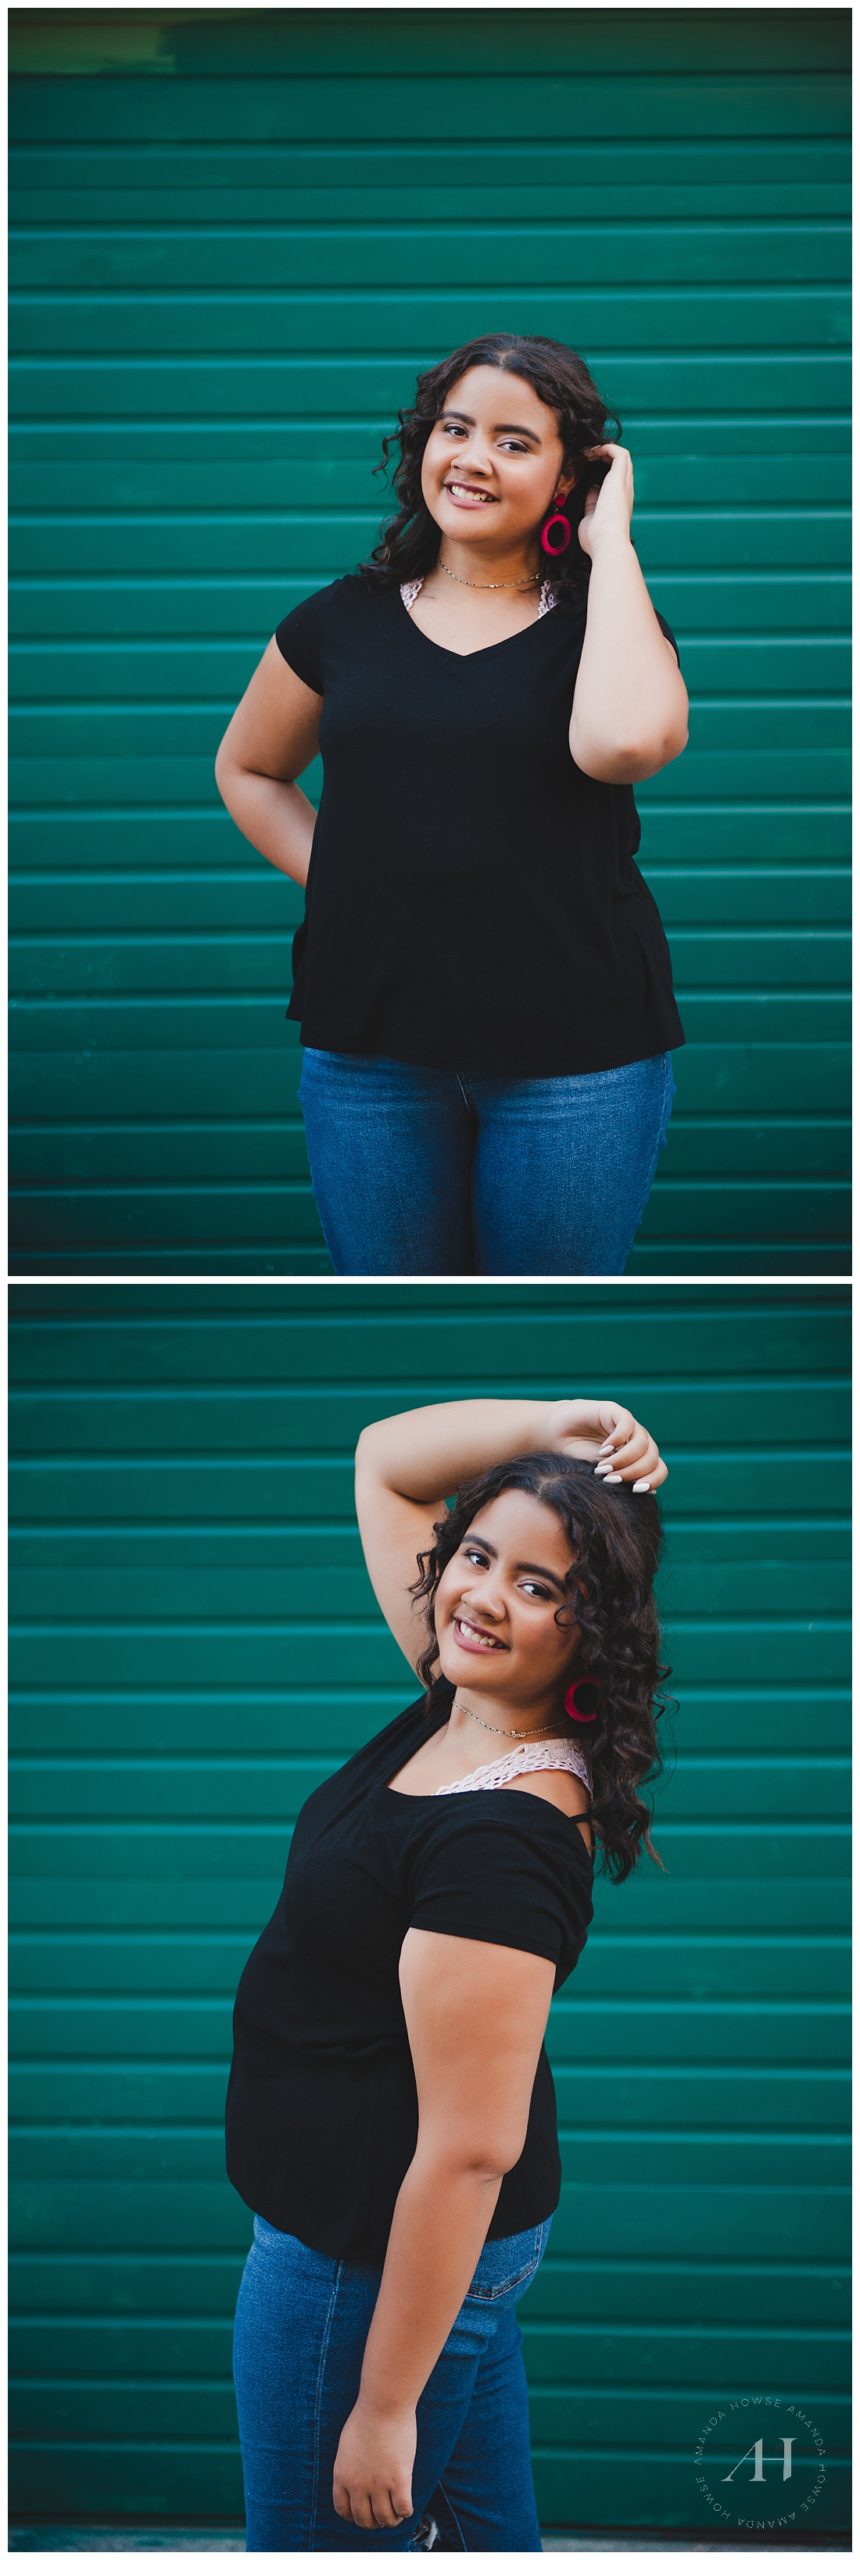 Posing in Front of the Colorful Tacoma Walls | City Portraits, Urban Tacoma Portraits, Modern Senior Portraits, Casual Outfit Inspo, Natural Hair and Makeup for Senior Portraits | Photographed by the Best Tacoma Senior Portrait Photographer Amanda Howse